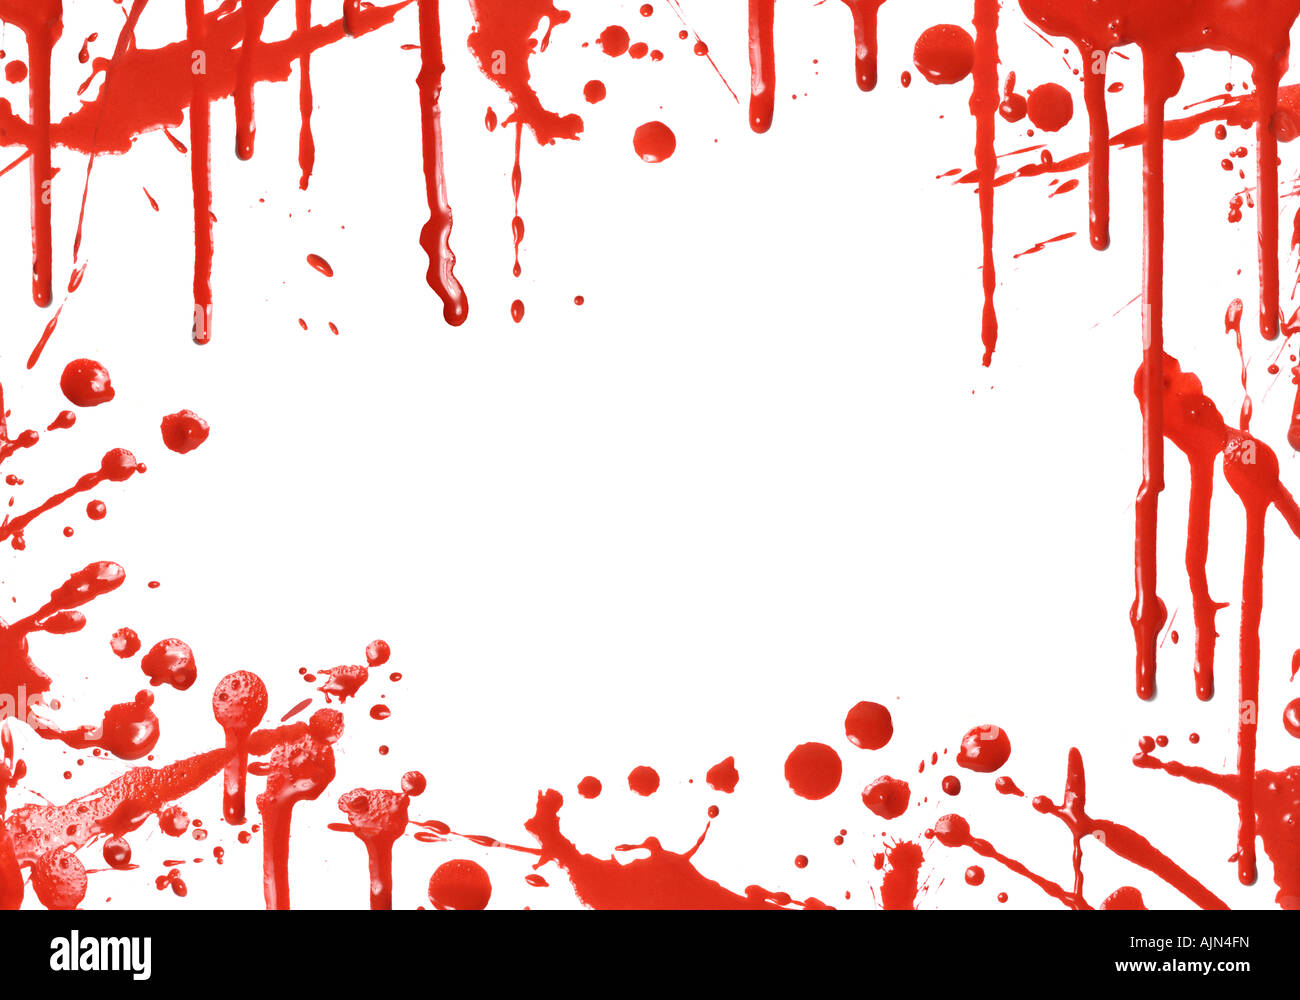 Red paint drips over white canvas background Stock Photo